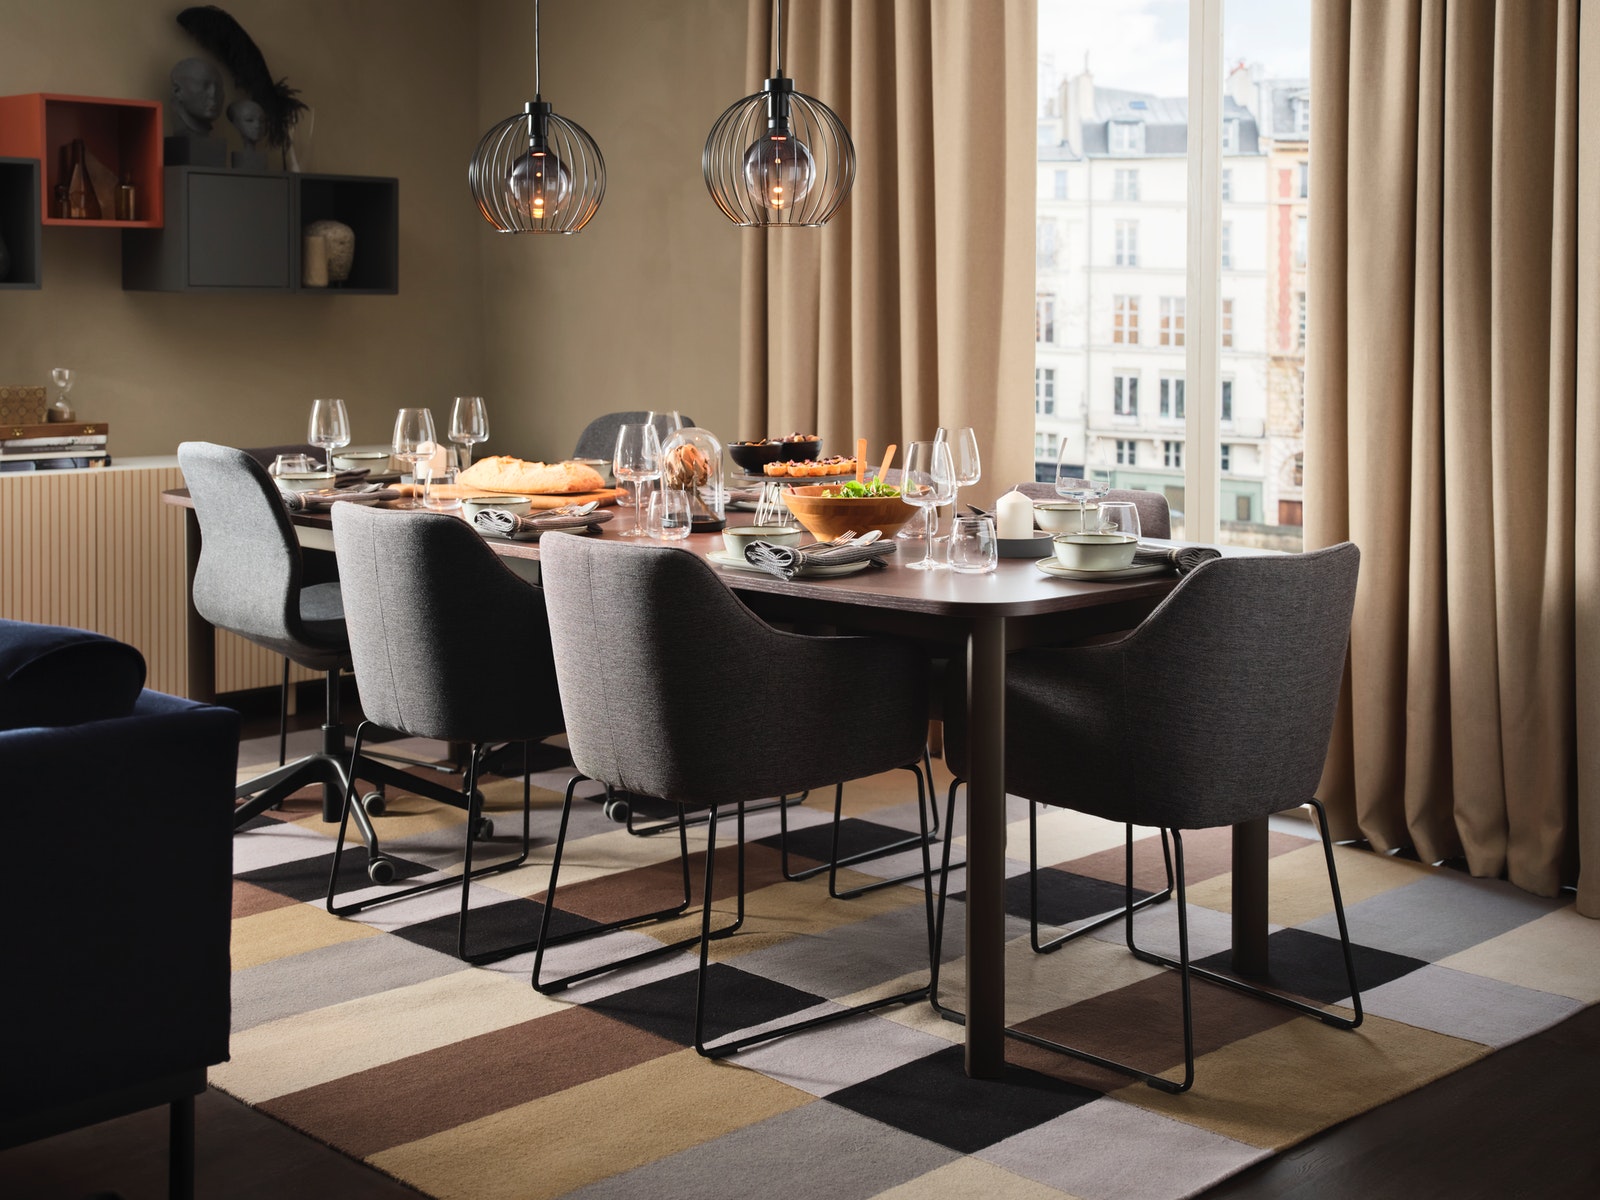 IKEA - A dining room that's ready for everything